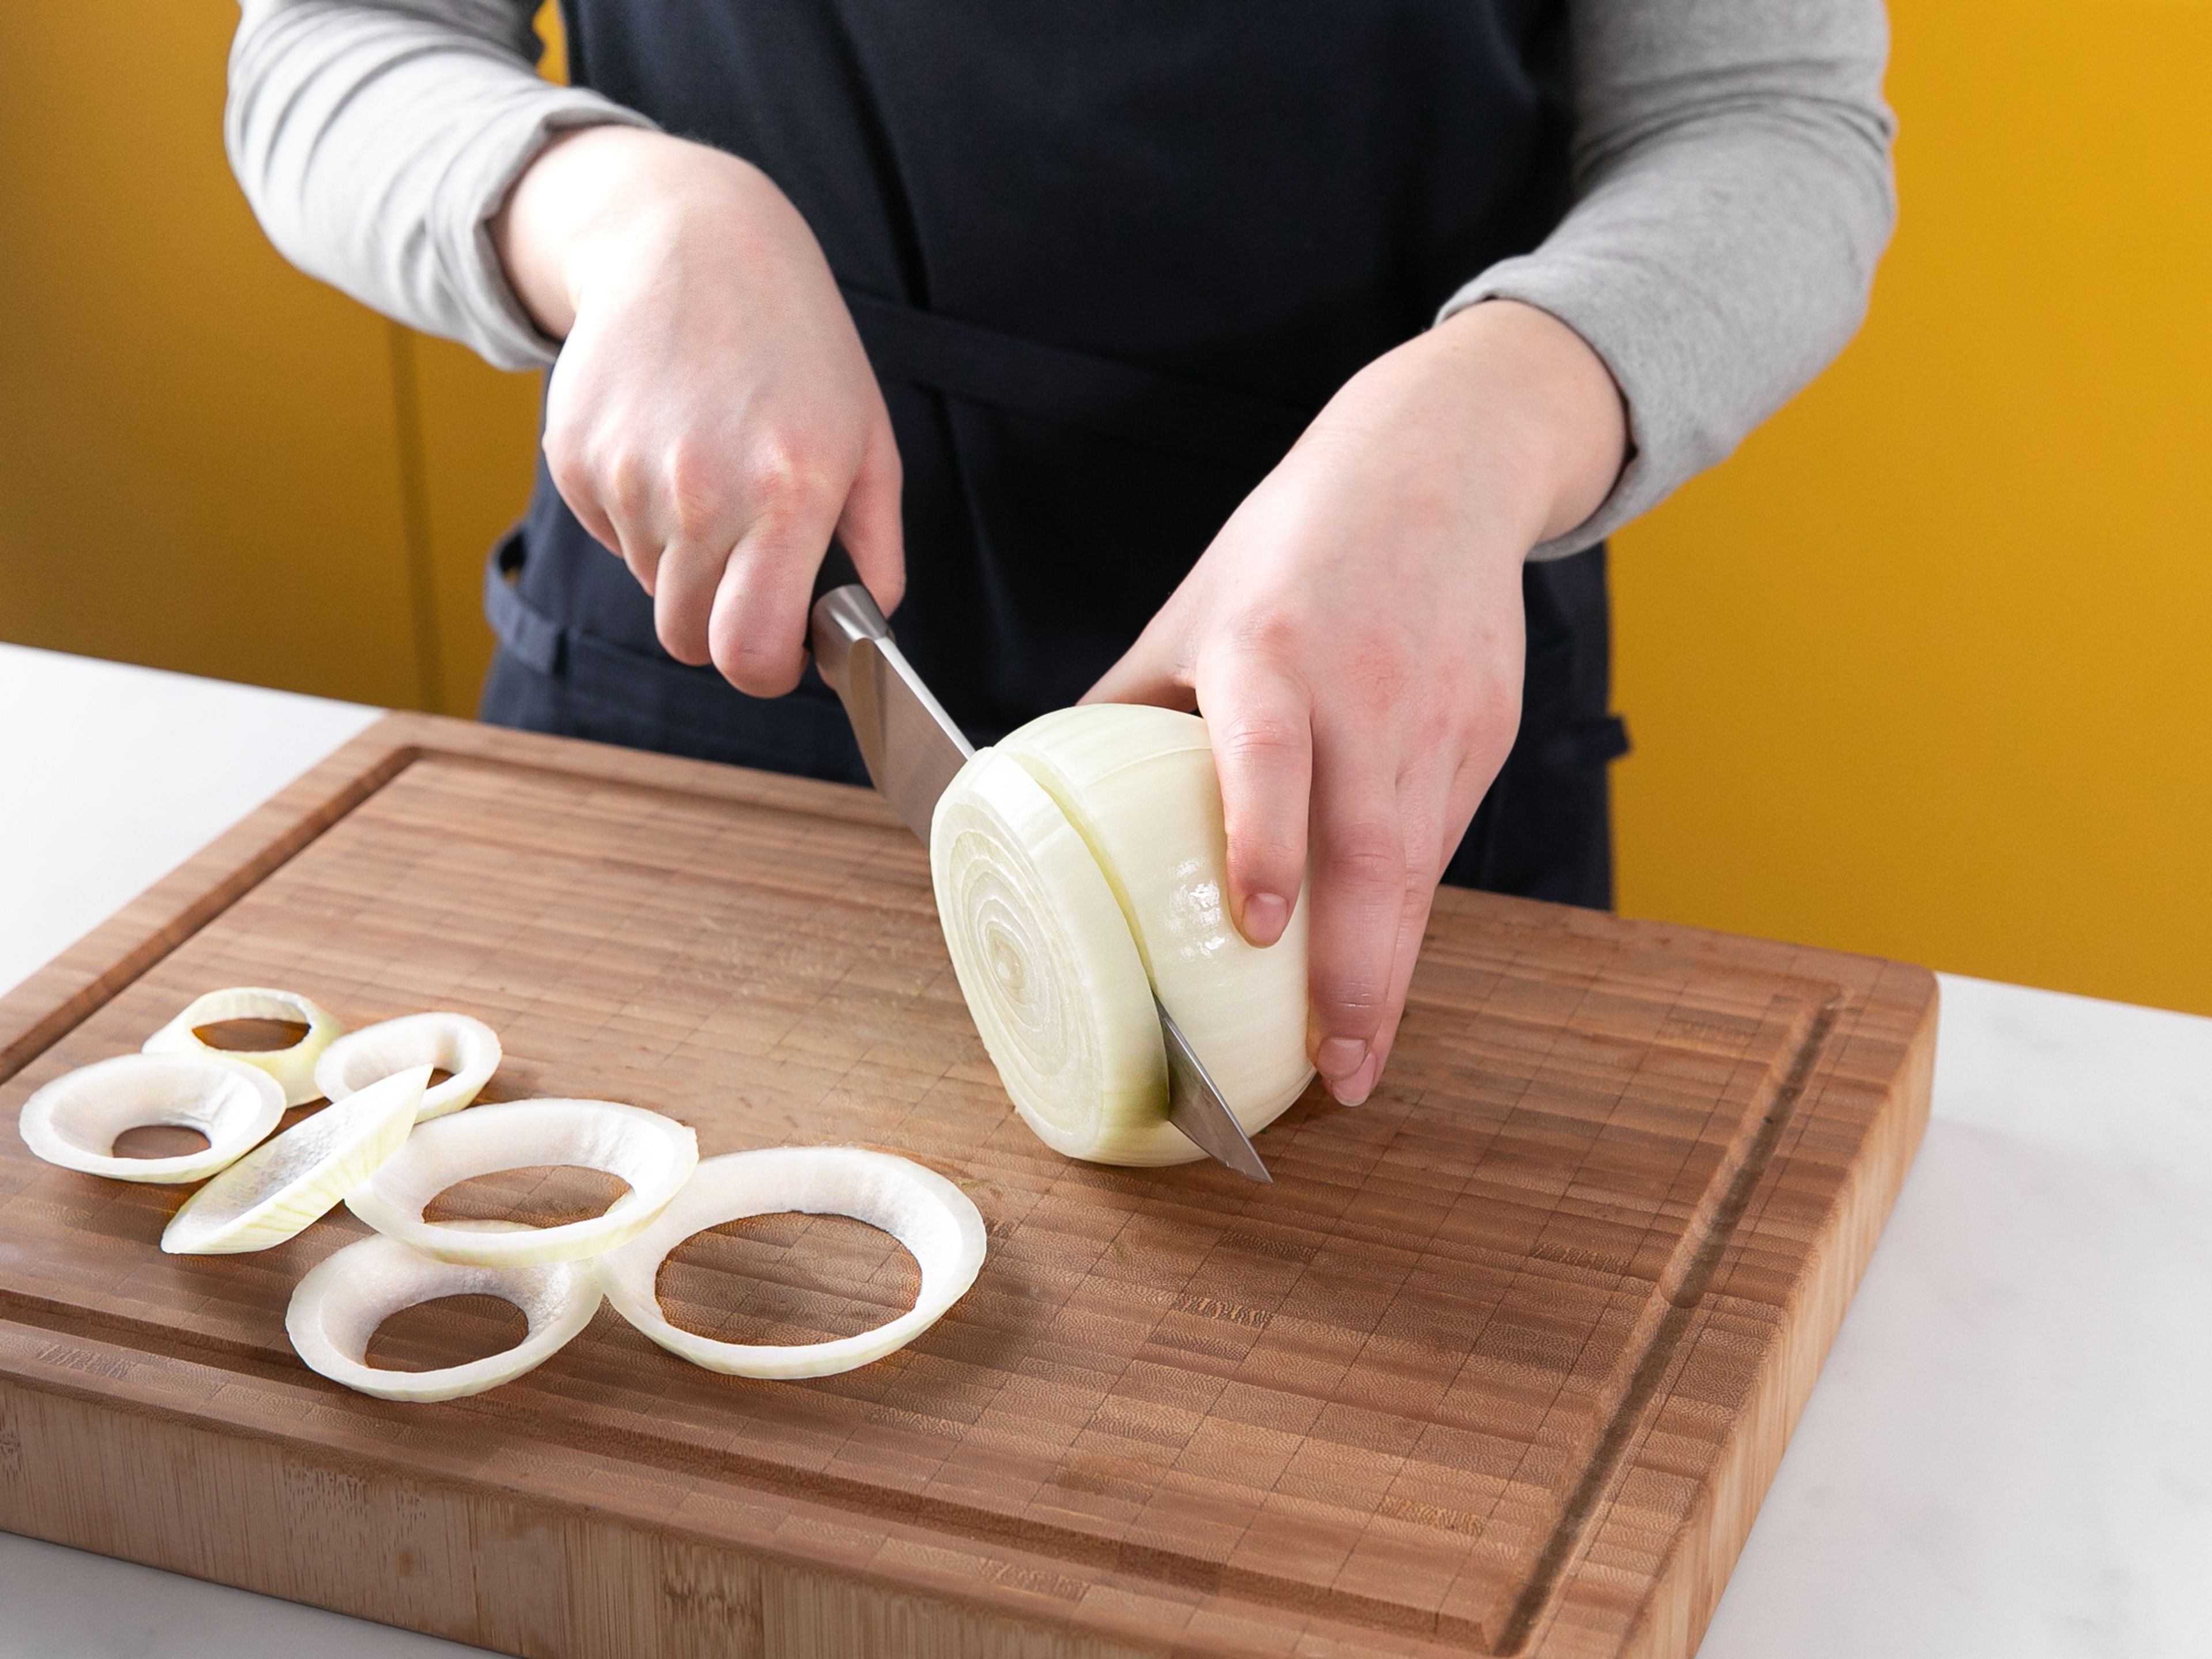 Peel onion and slice into ½ cm/¼ in. thick rings. Stir flour, baking powder, and salt together in a bowl. Add the milk and egg to a separate bowl and whisk to combine. Pour breadcrumbs evenly into a rimmed plate.